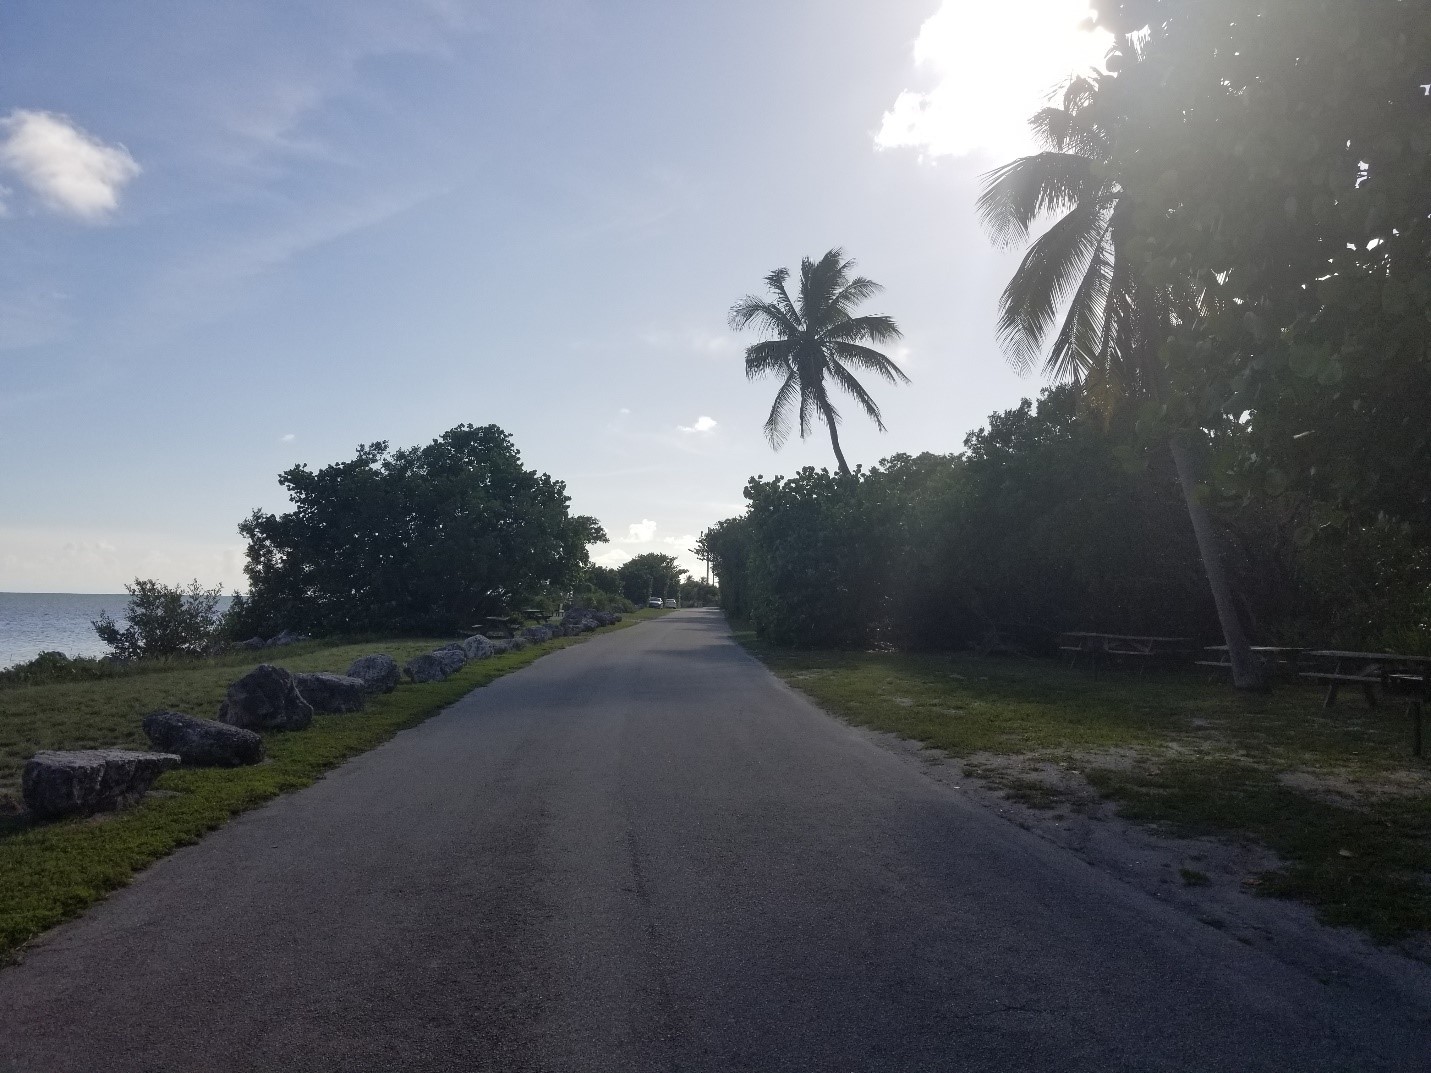 Park drive heading to the campground before Hurricane Irma.